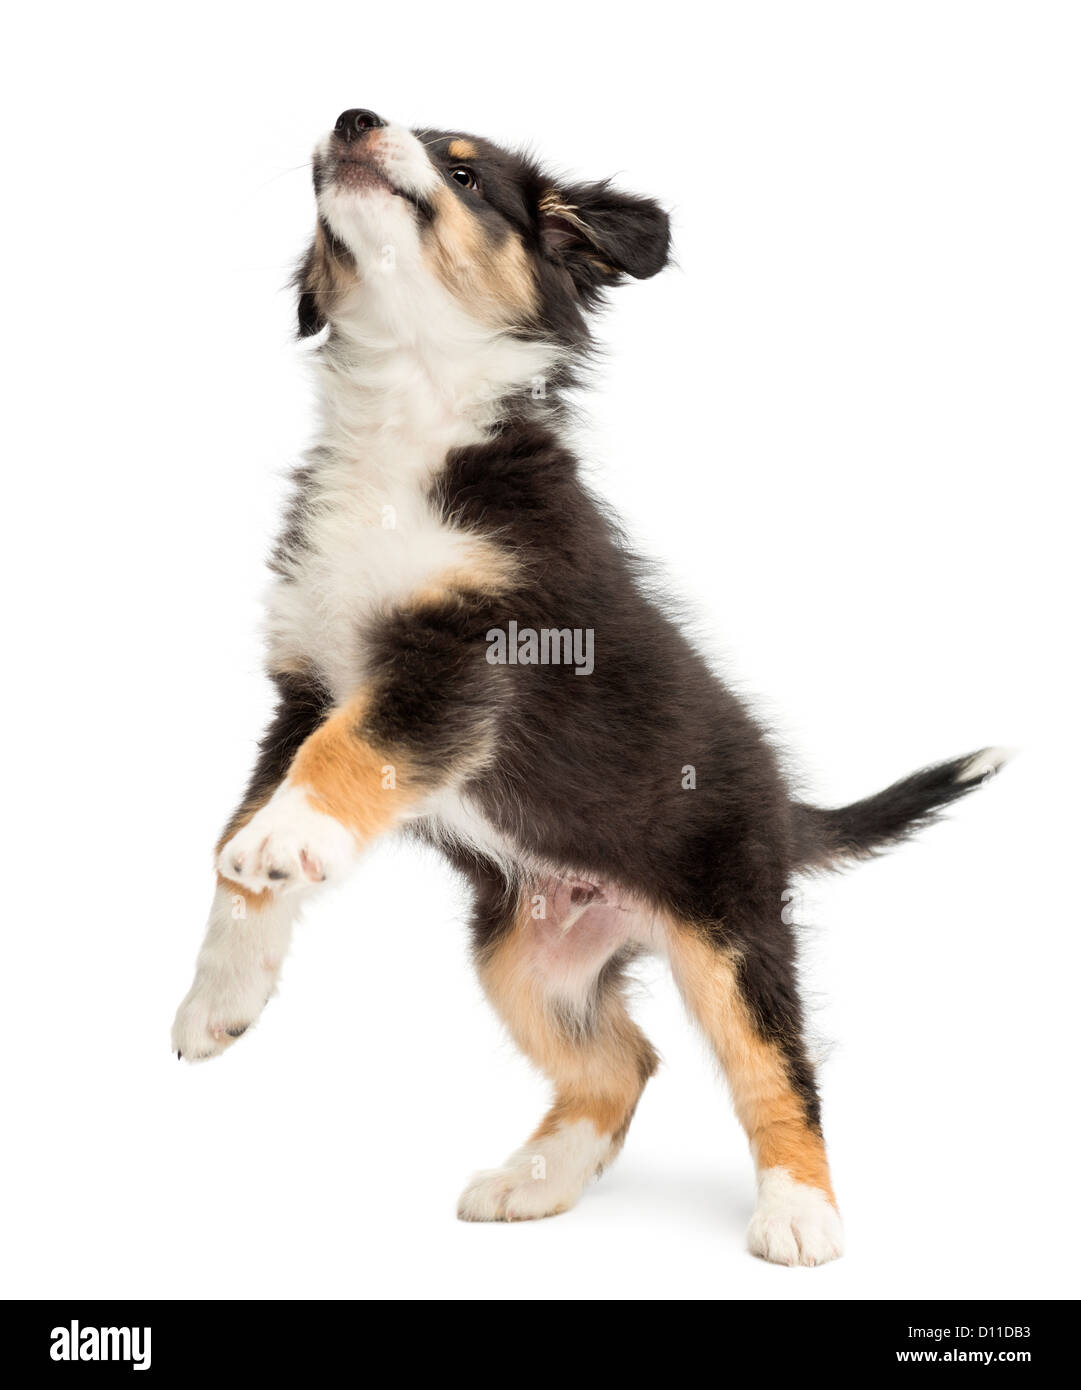 Australian Shepherd puppy, 2 months old, on hind legs and looking up against white background Stock Photo